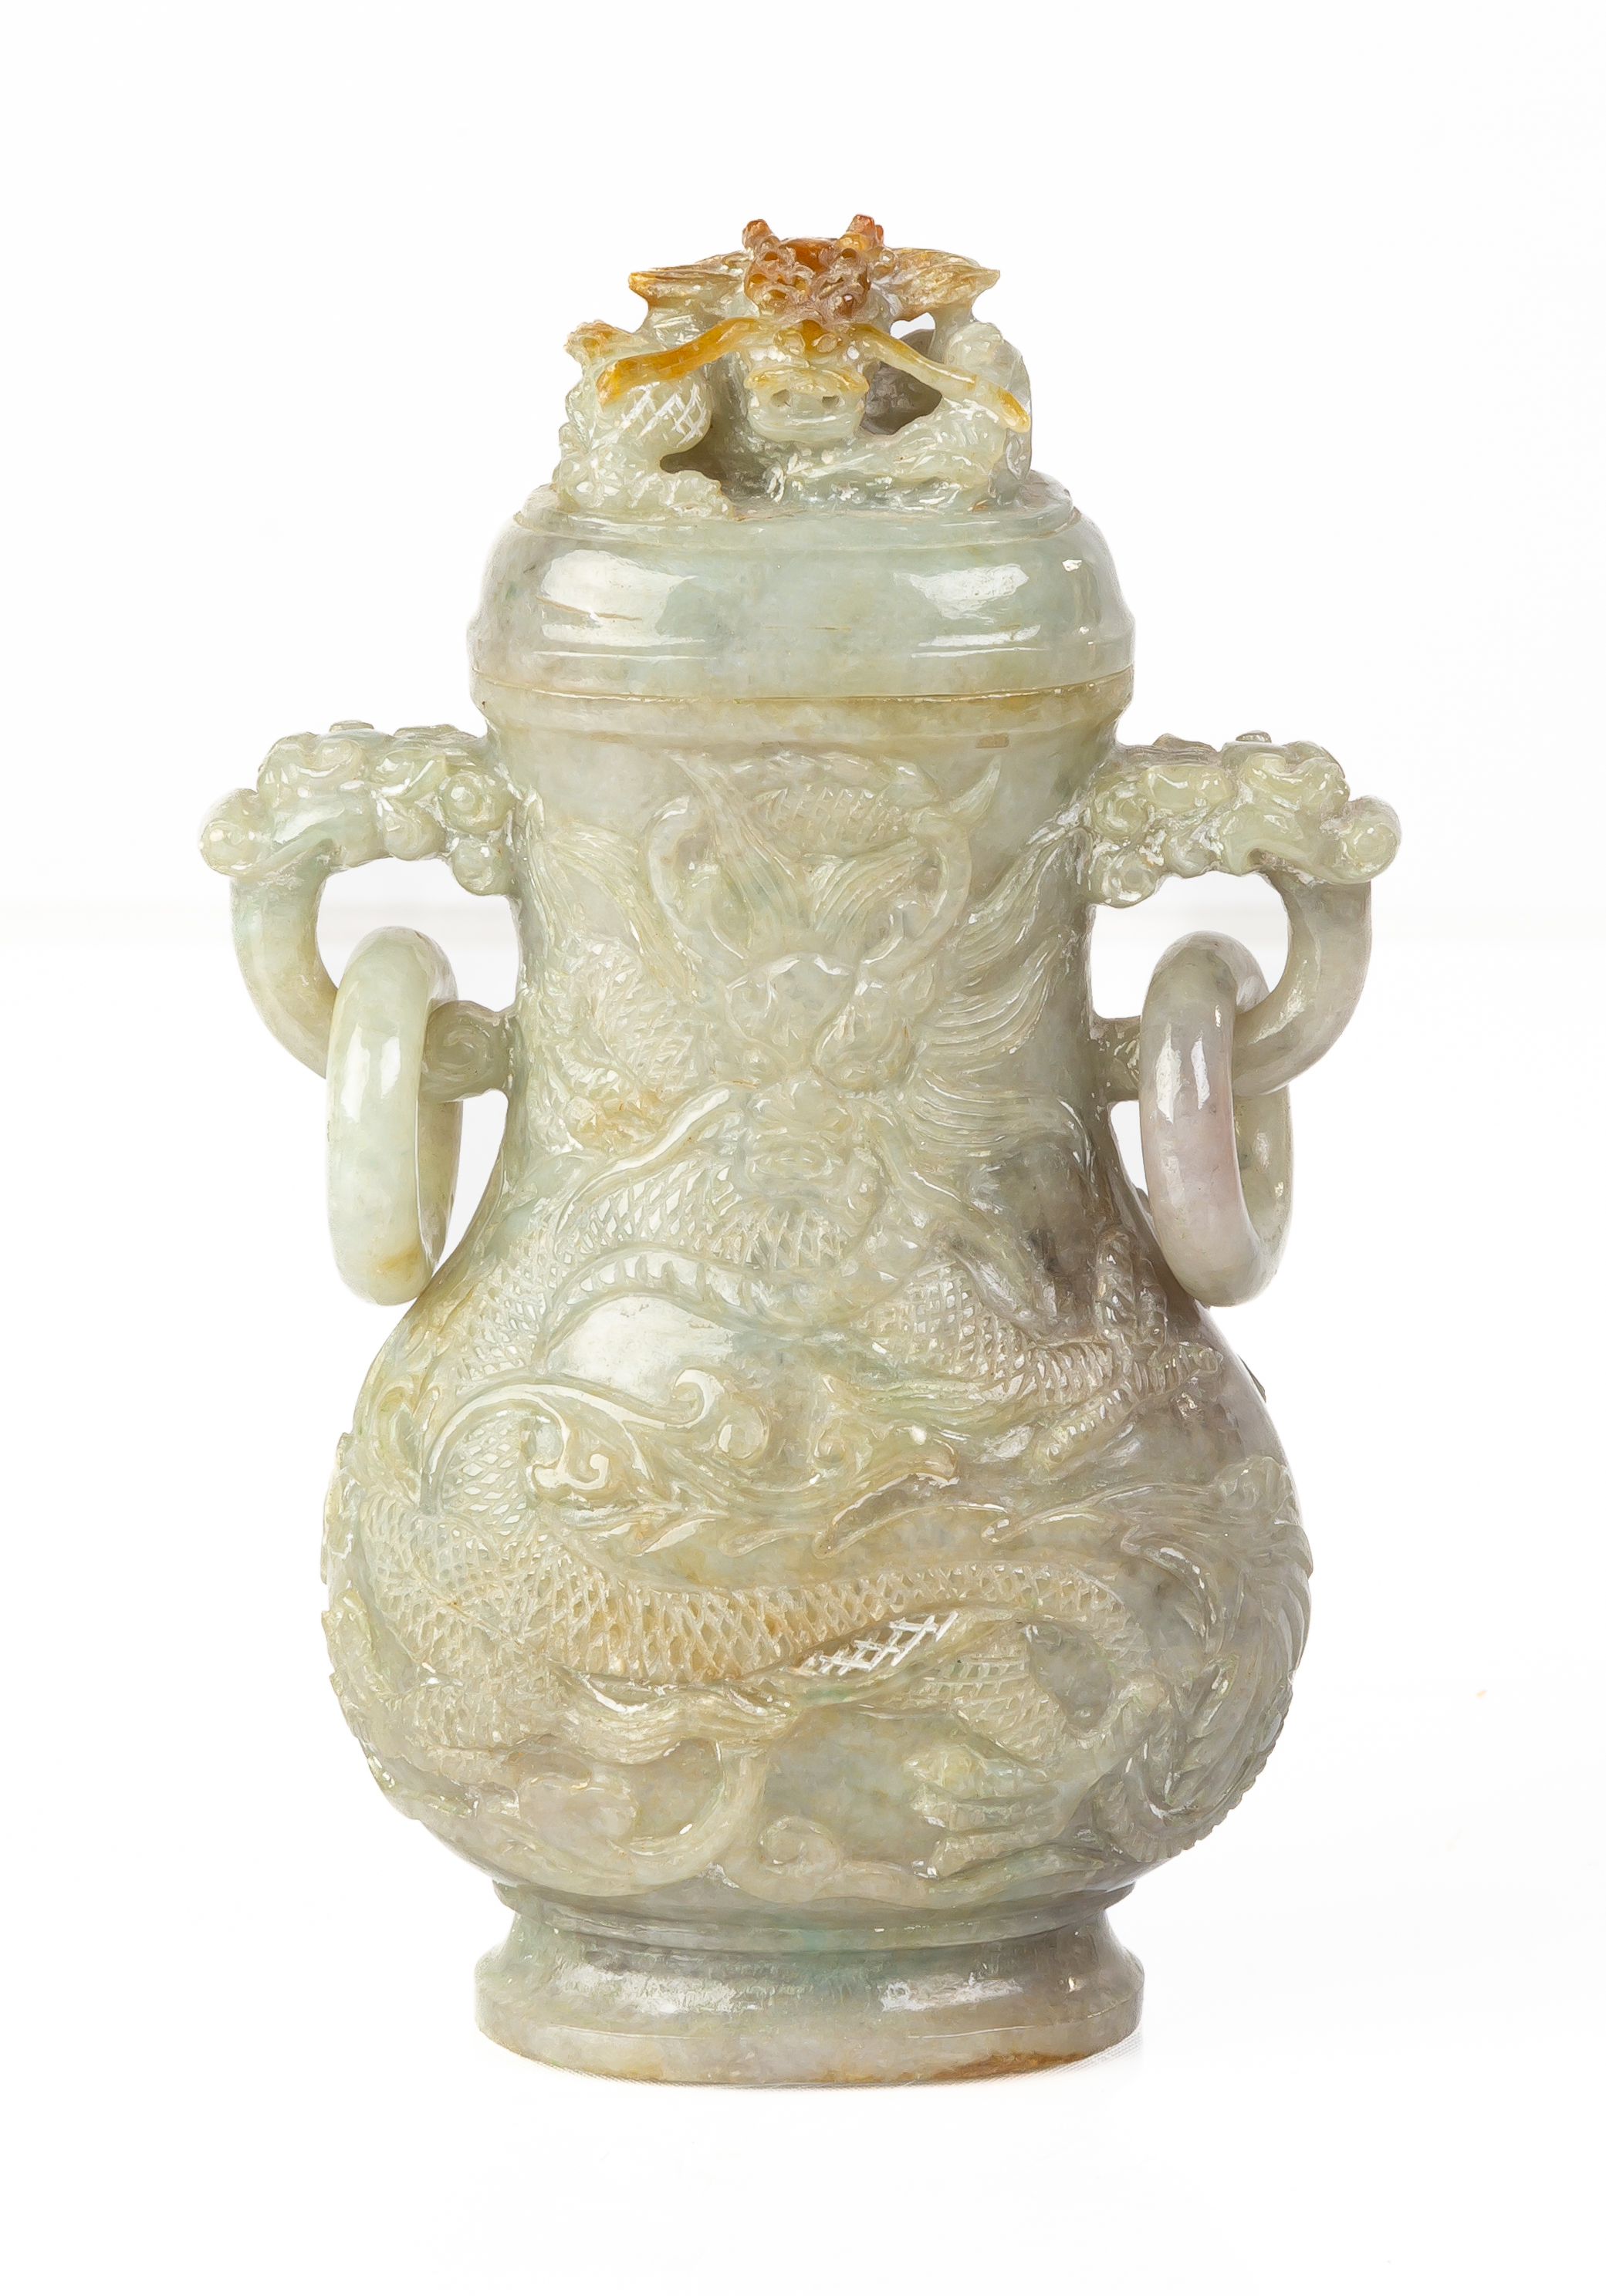 CHINESE CARVED JADE COVERED URN